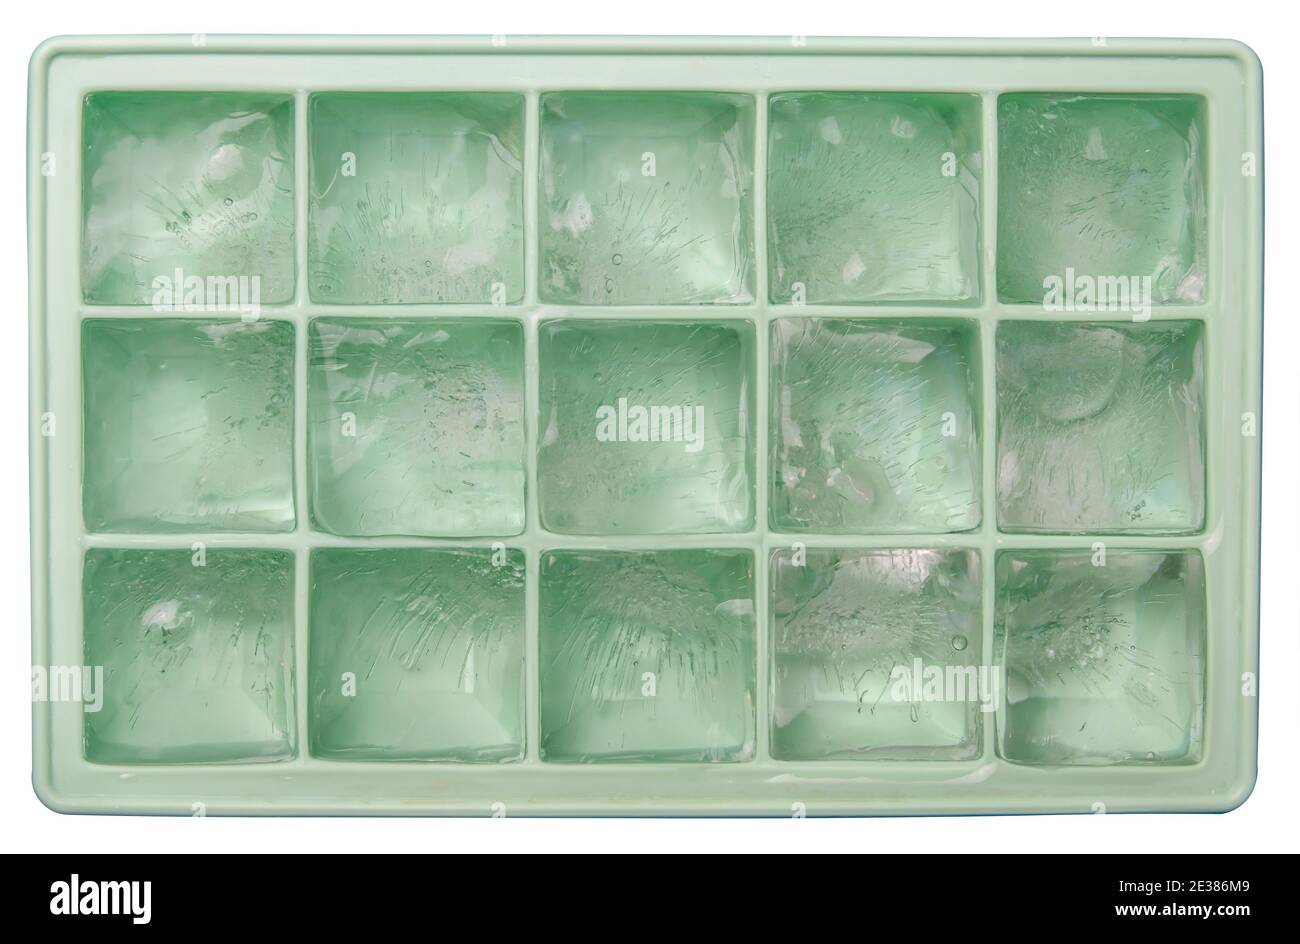 Isolated Ice Tray With Ice Cubes On A White Background Stock Photo